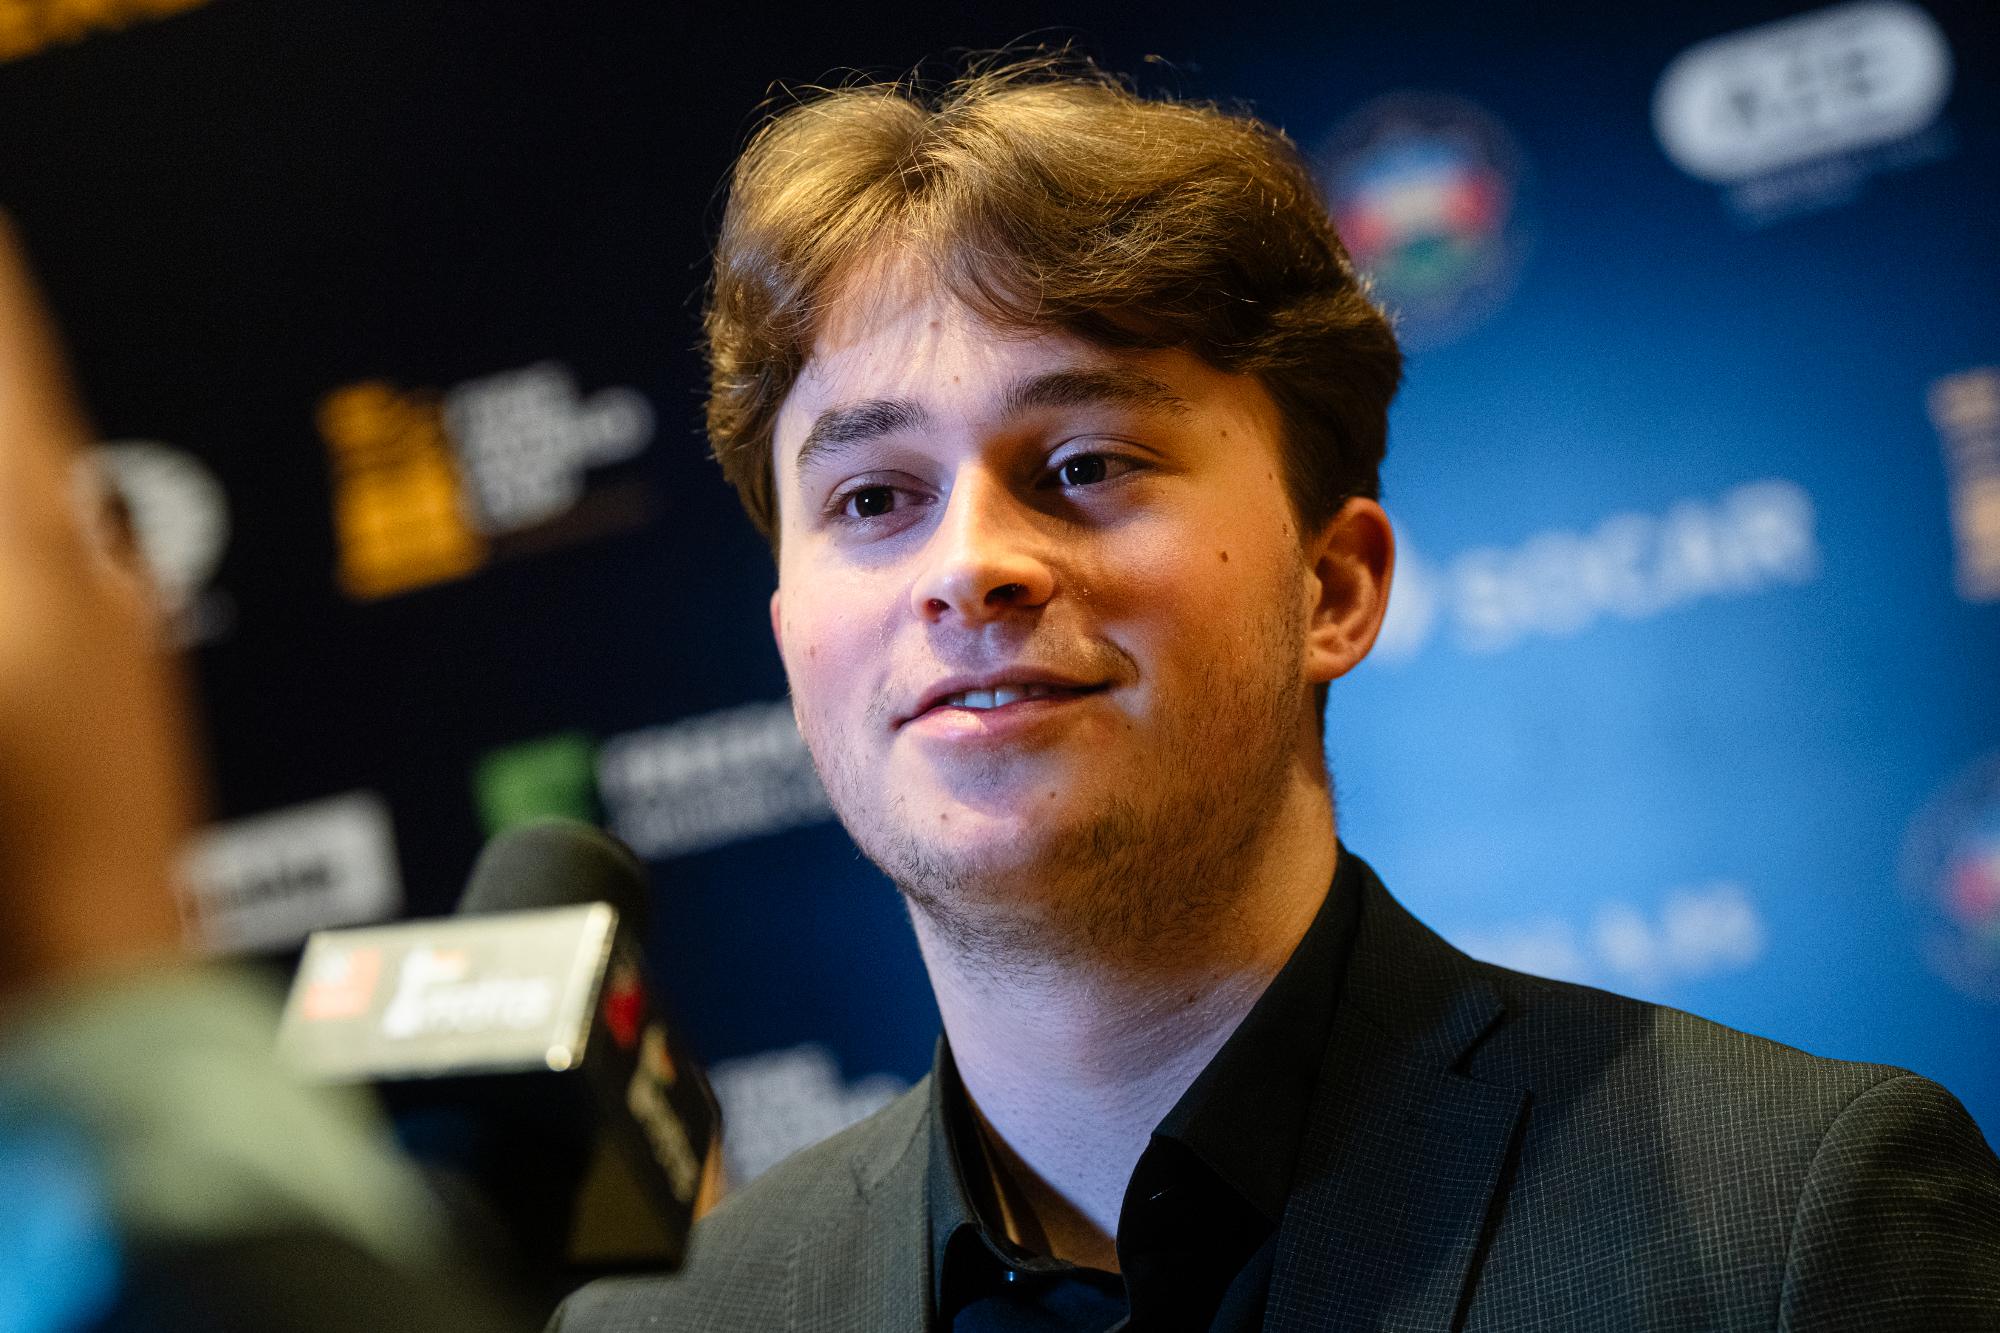 Congratulations to Vincent Keymer for crossing 2700 live rating after his  win today. : r/chess